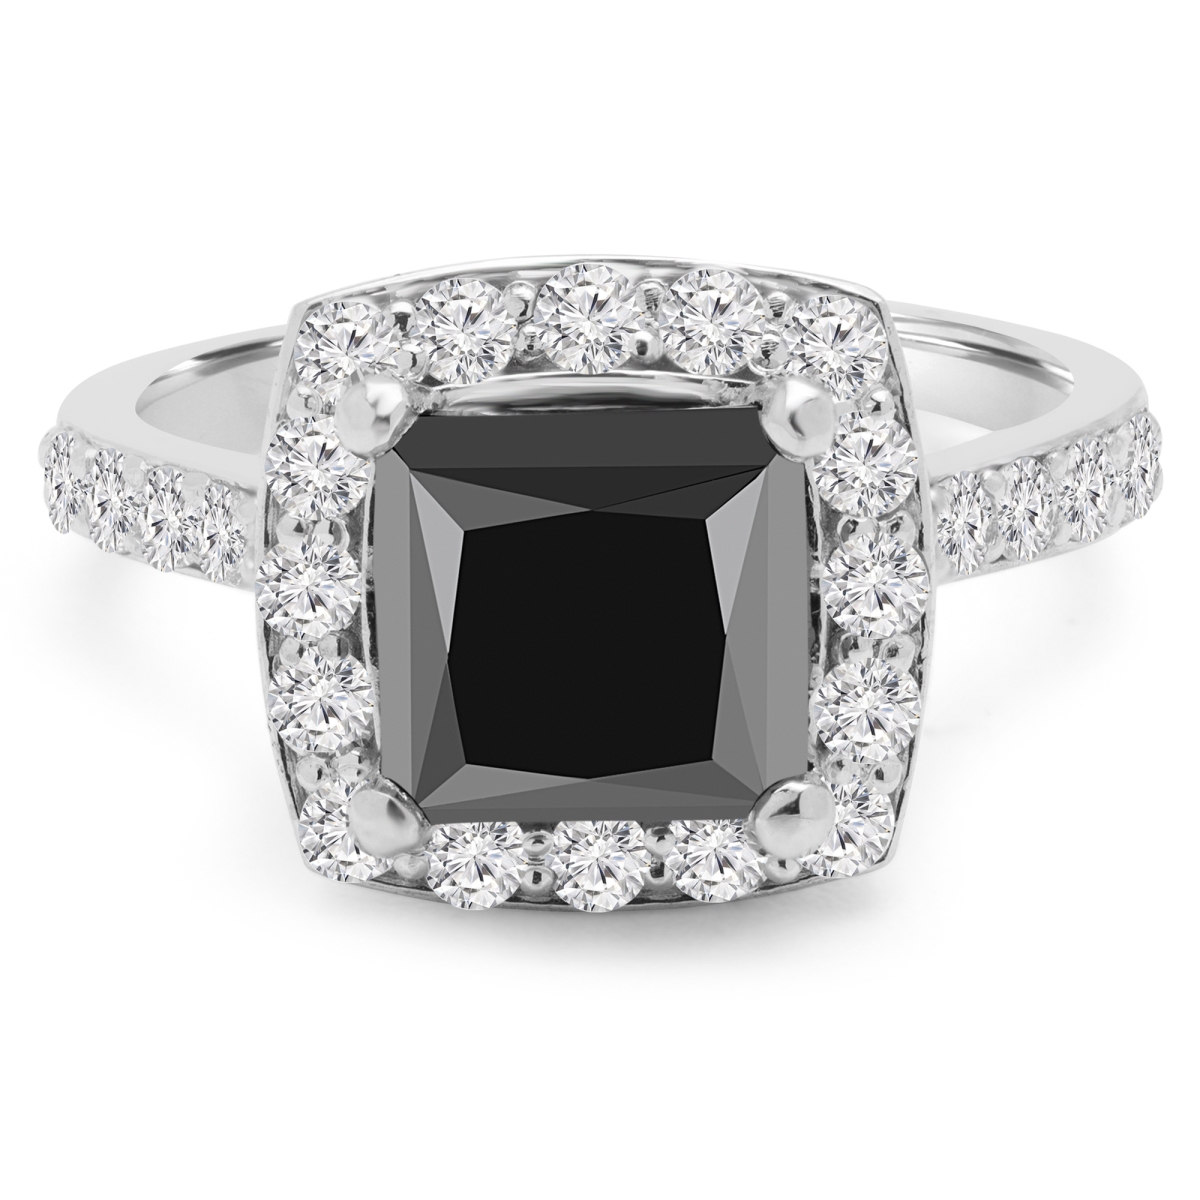 Picture of Majesty Diamonds MD190210-P 2.875 CTW Princess Black Diamond Cushion Halo Engagement Ring in 14K White Gold with Accents